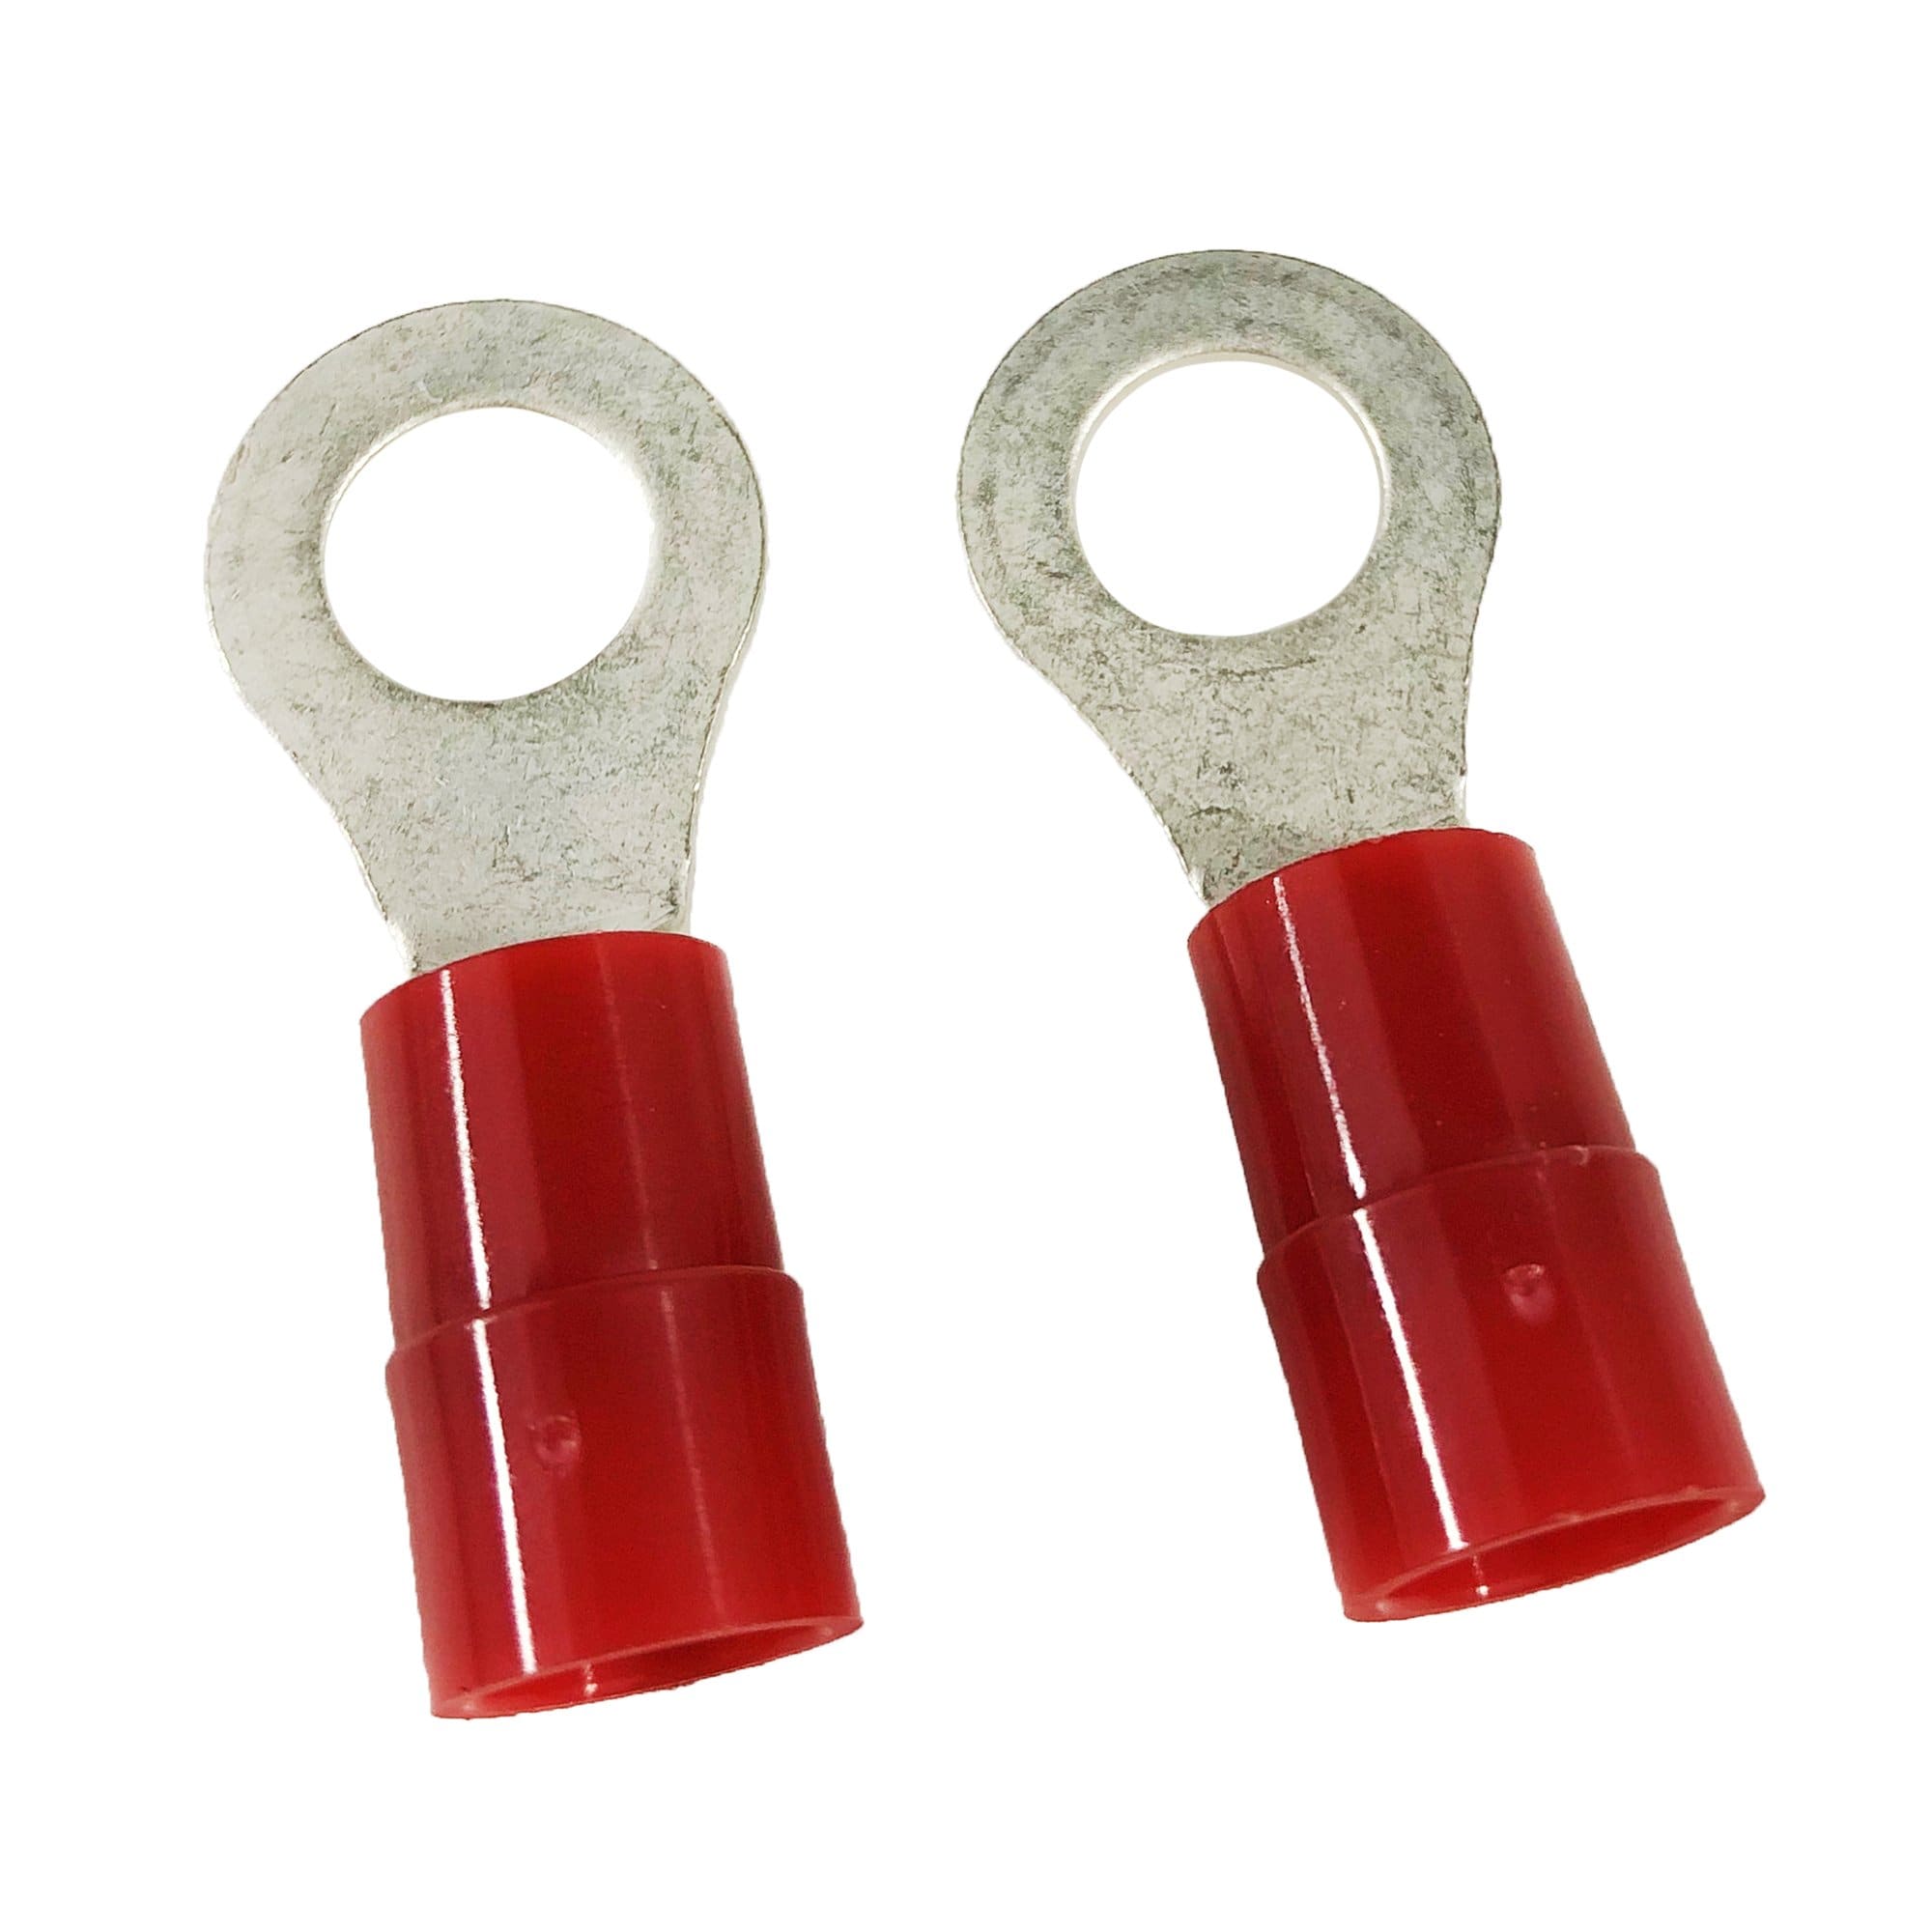 Ancor 230235 Power Products Nylon Ring Terminal, #8 5/16", 2pc